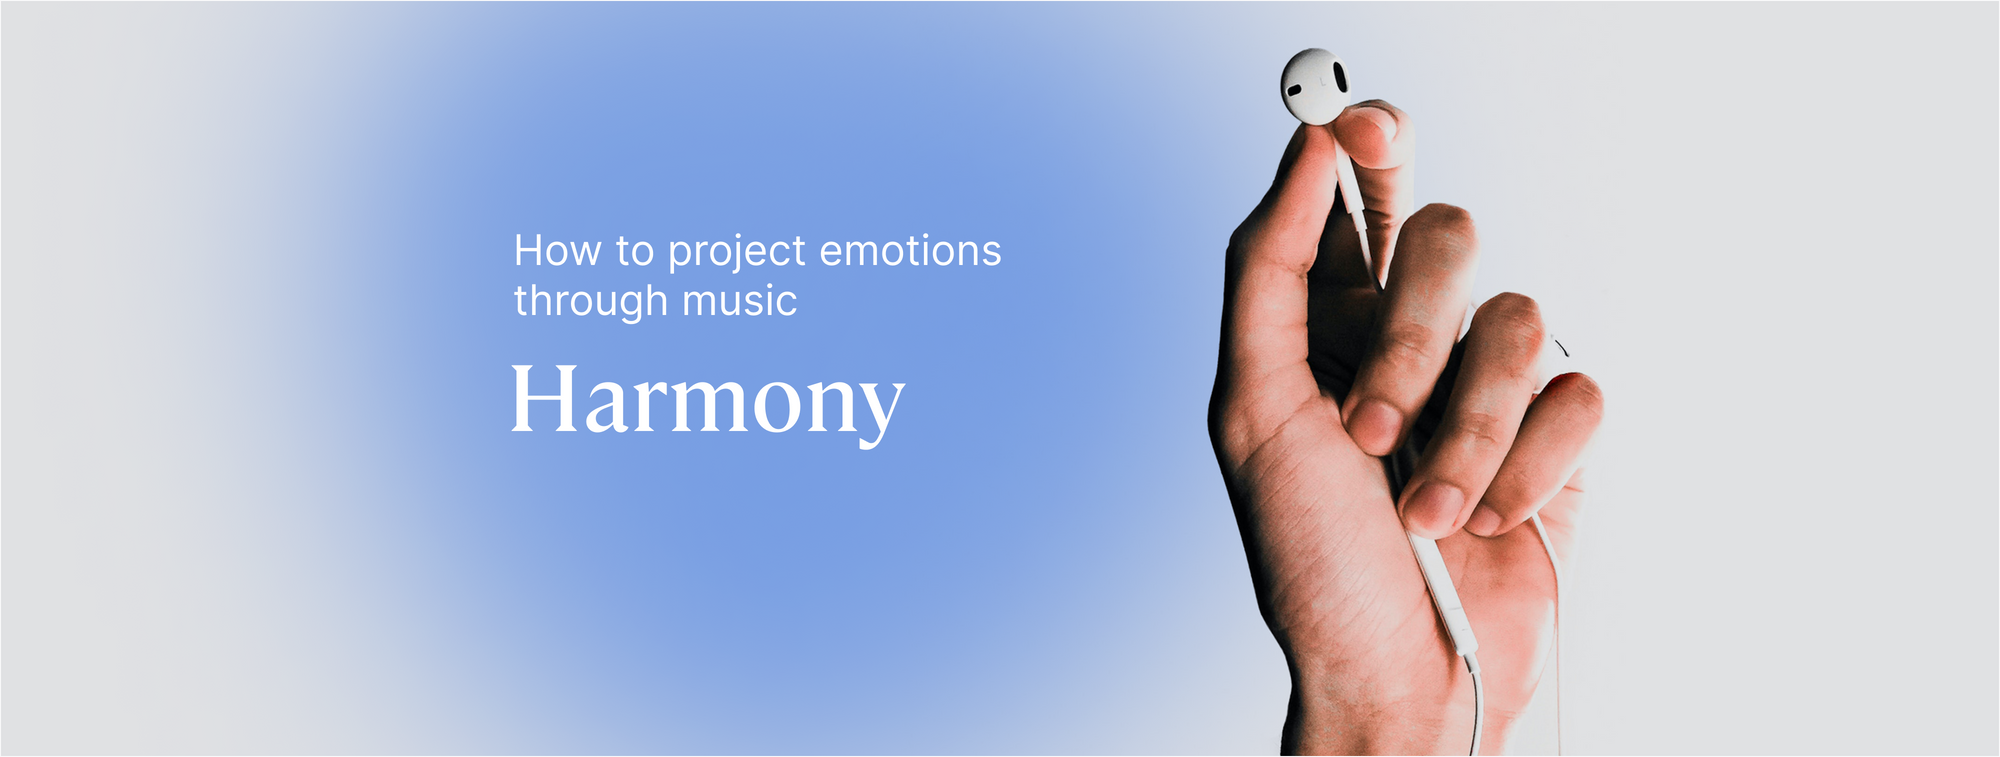 How to project emotions through music: Creating a powerful harmony